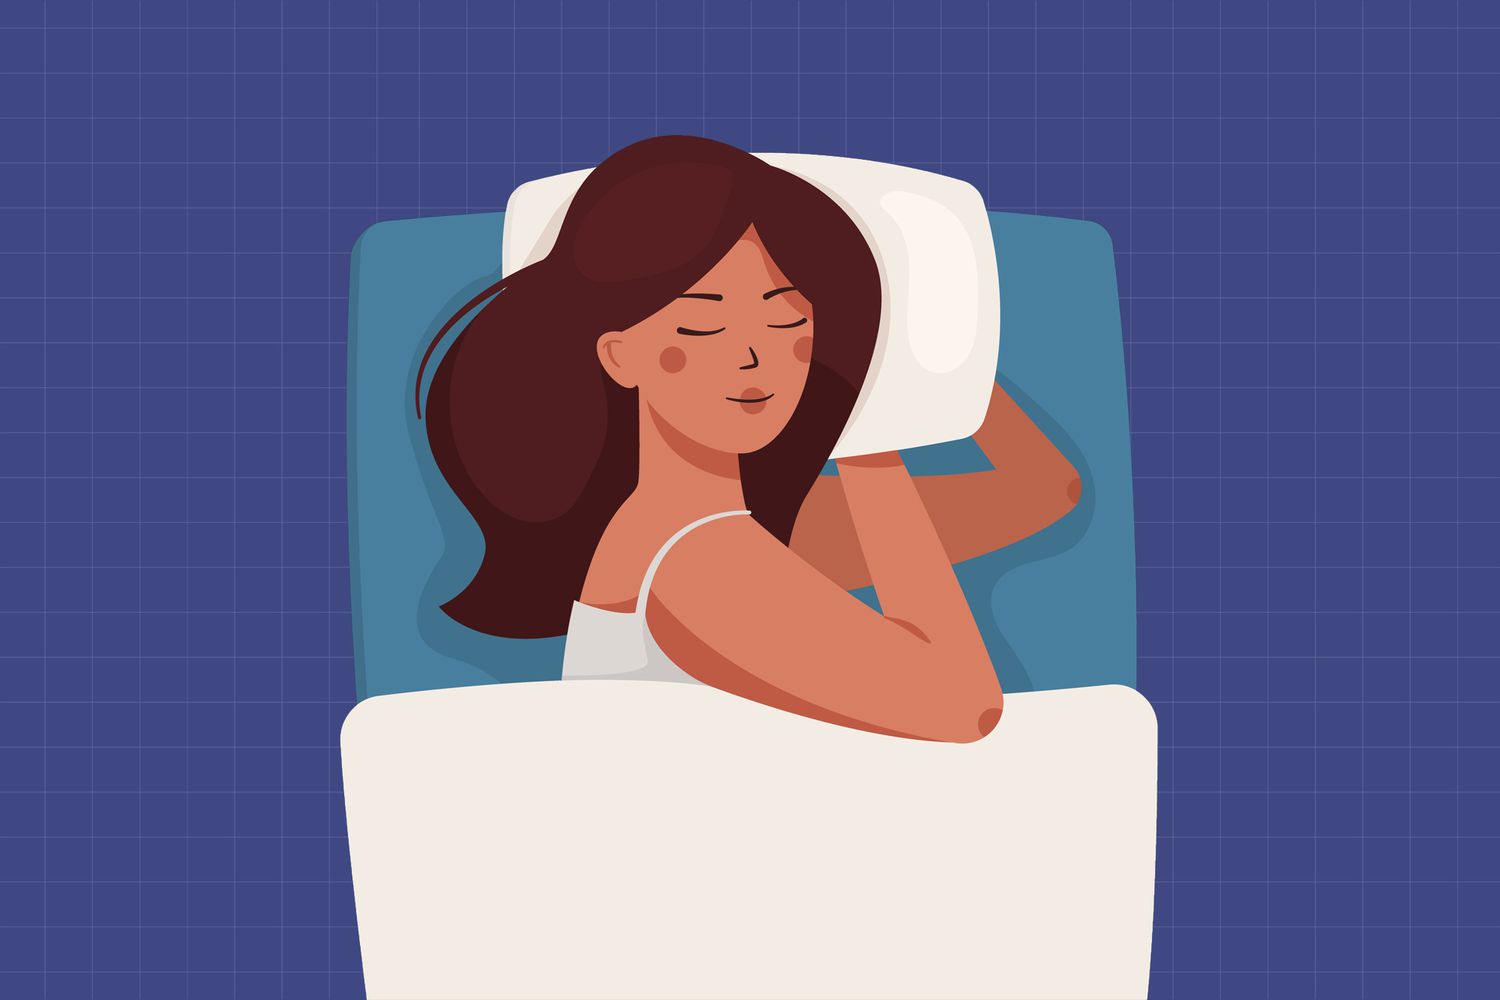 an illustration of a person sleeping